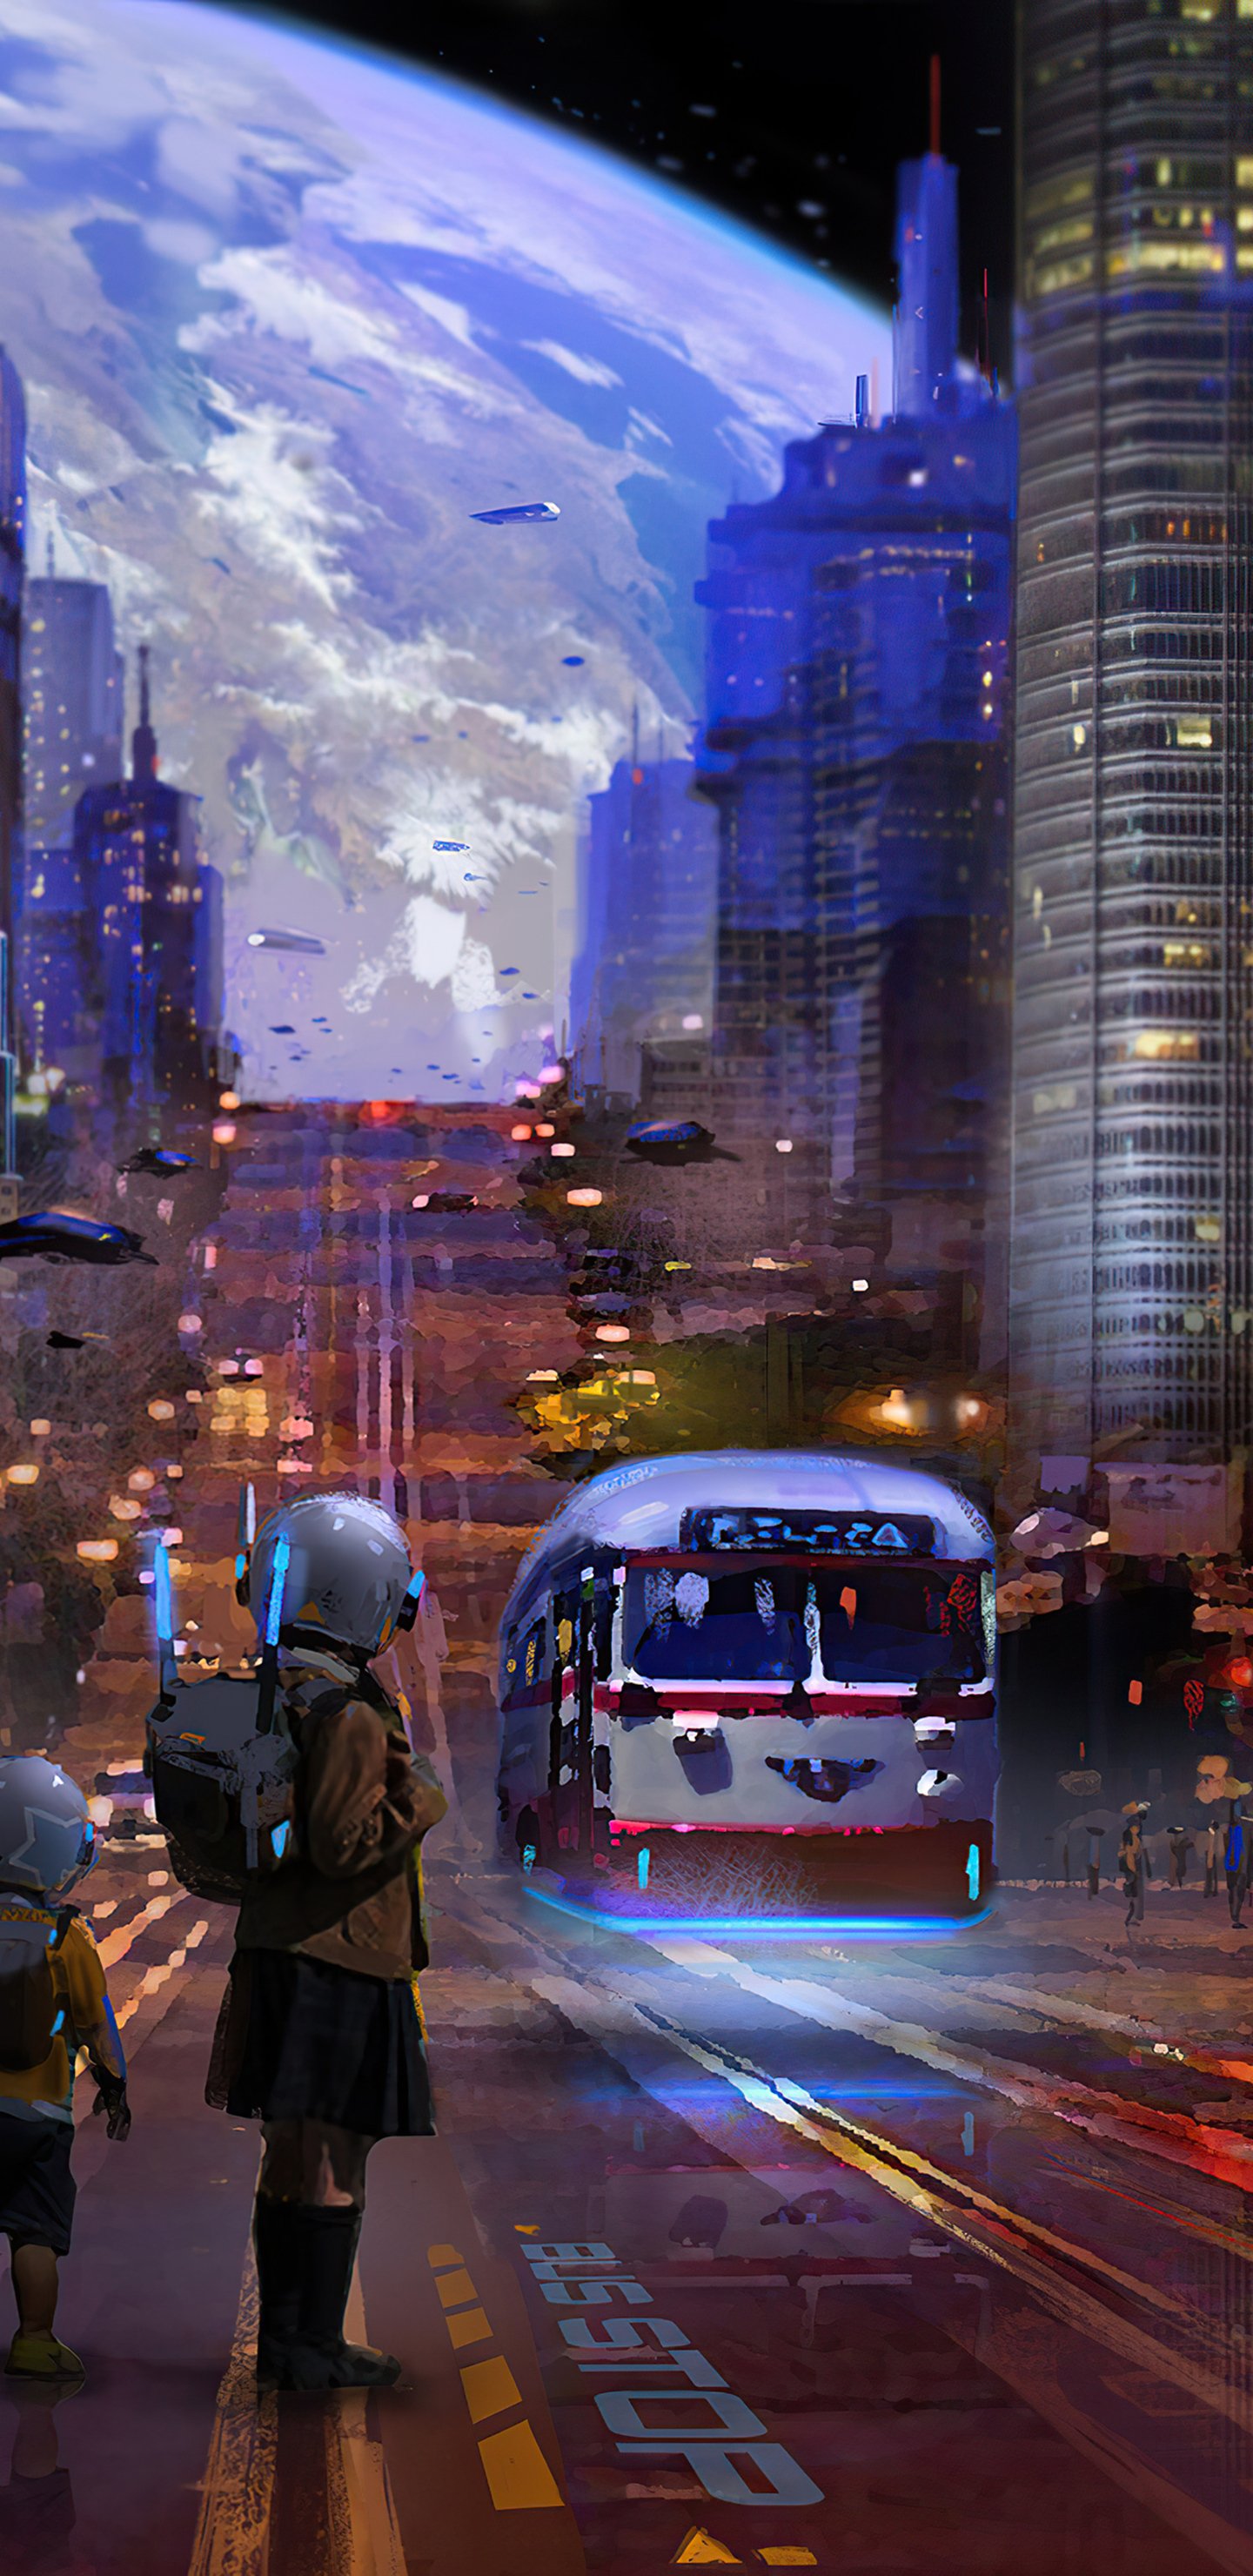 Star City Bus Sk Samsung Galaxy Note S S SQHD HD 4k Wallpaper, Image, Background, Photo and Picture